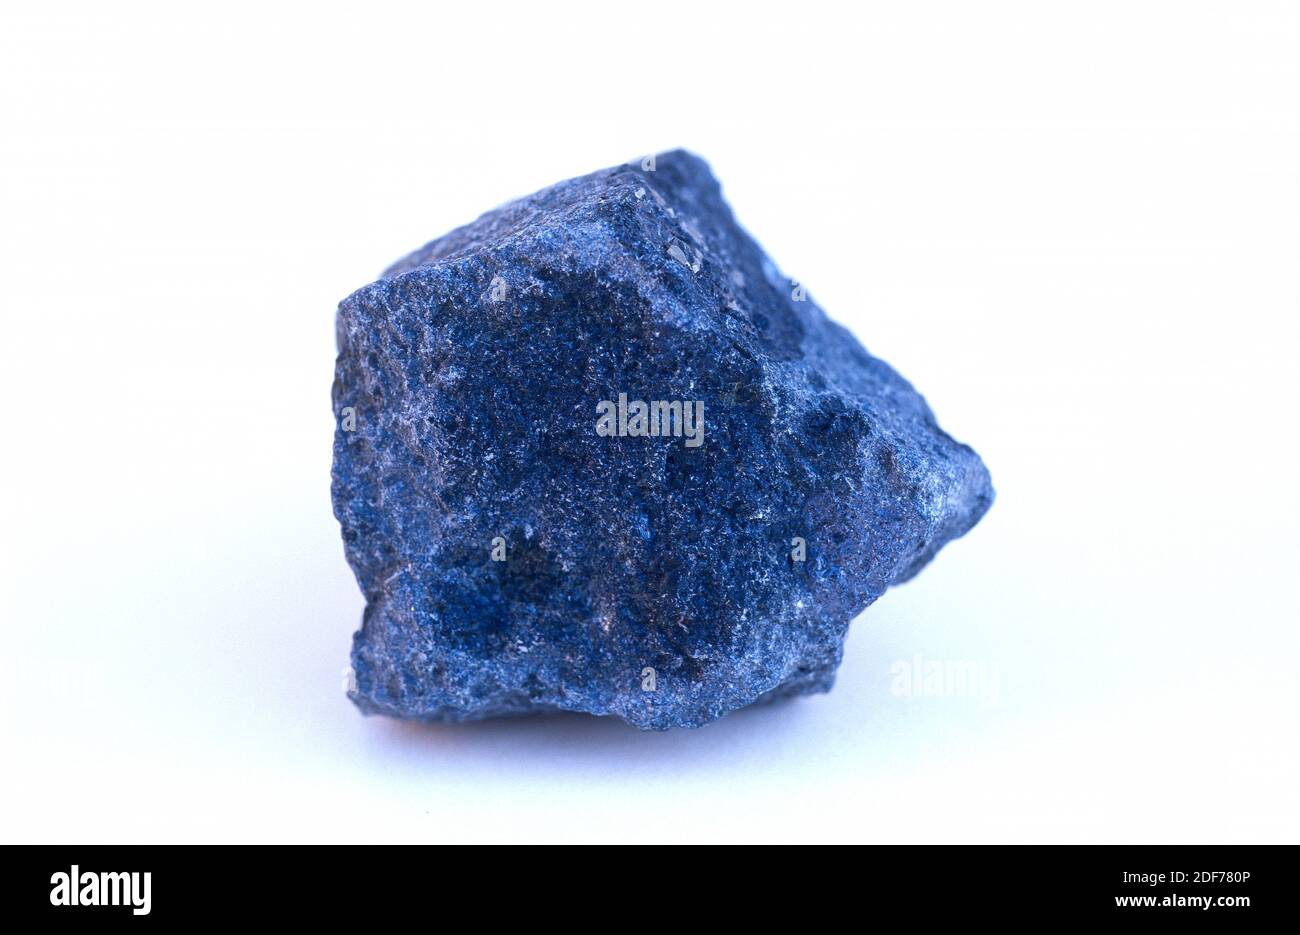 Kimberlite is an igneous rock coming from the earth's mantle, is the main diamonds deposit. Stock Photo